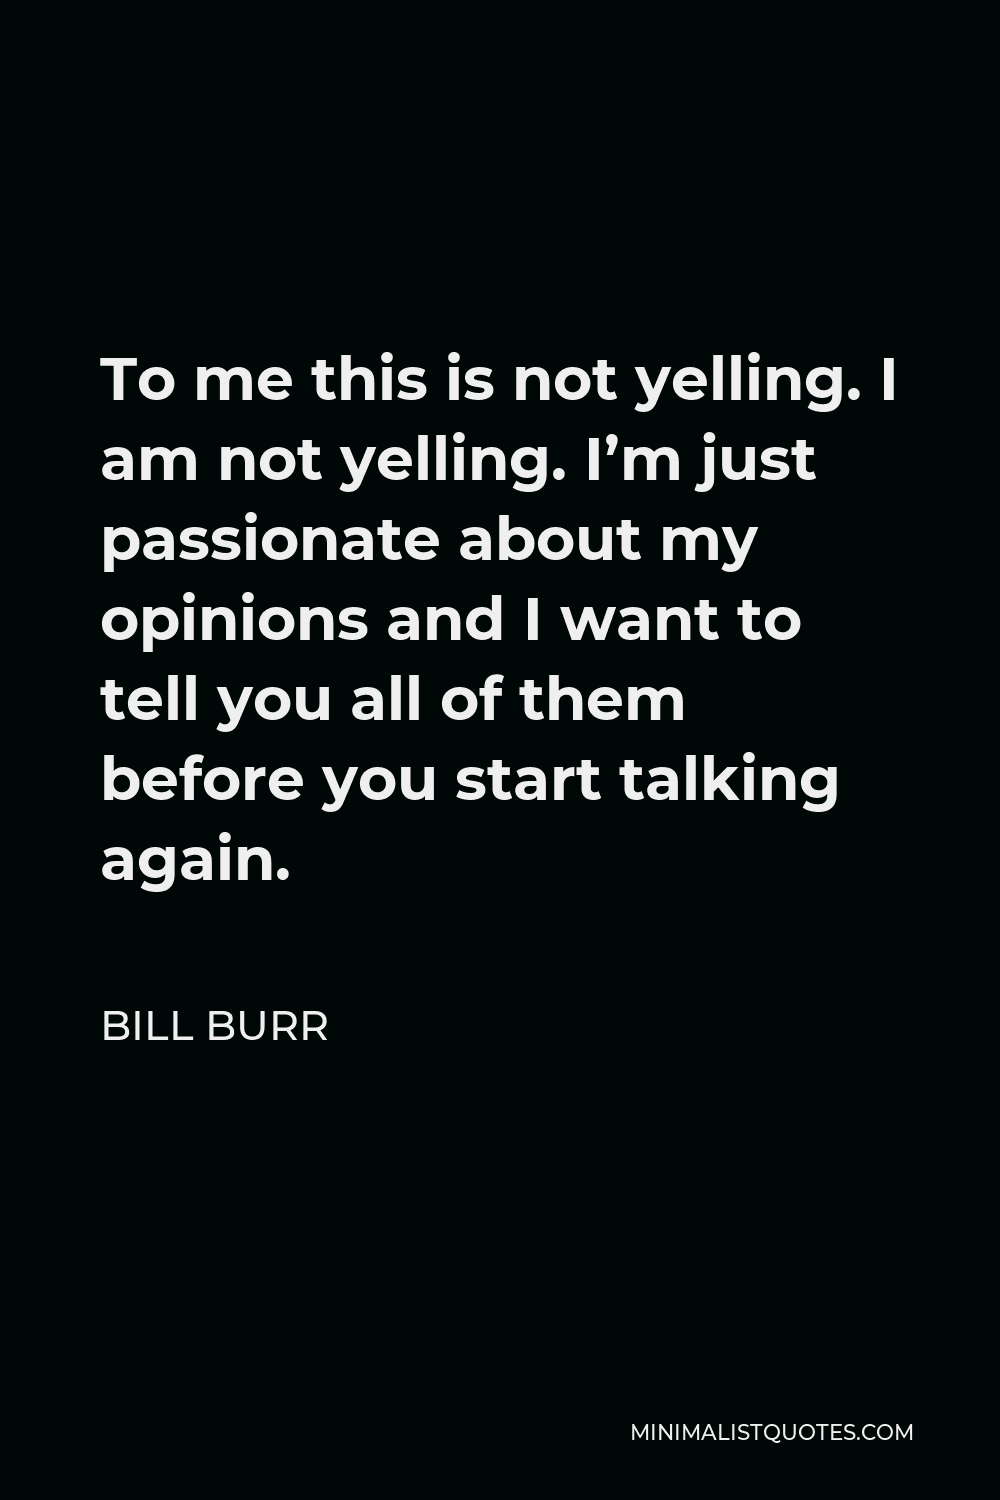 Bill Burr Quote - To me this is not yelling. I am not yelling. I’m just passionate about my opinions and I want to tell you all of them before you start talking again.